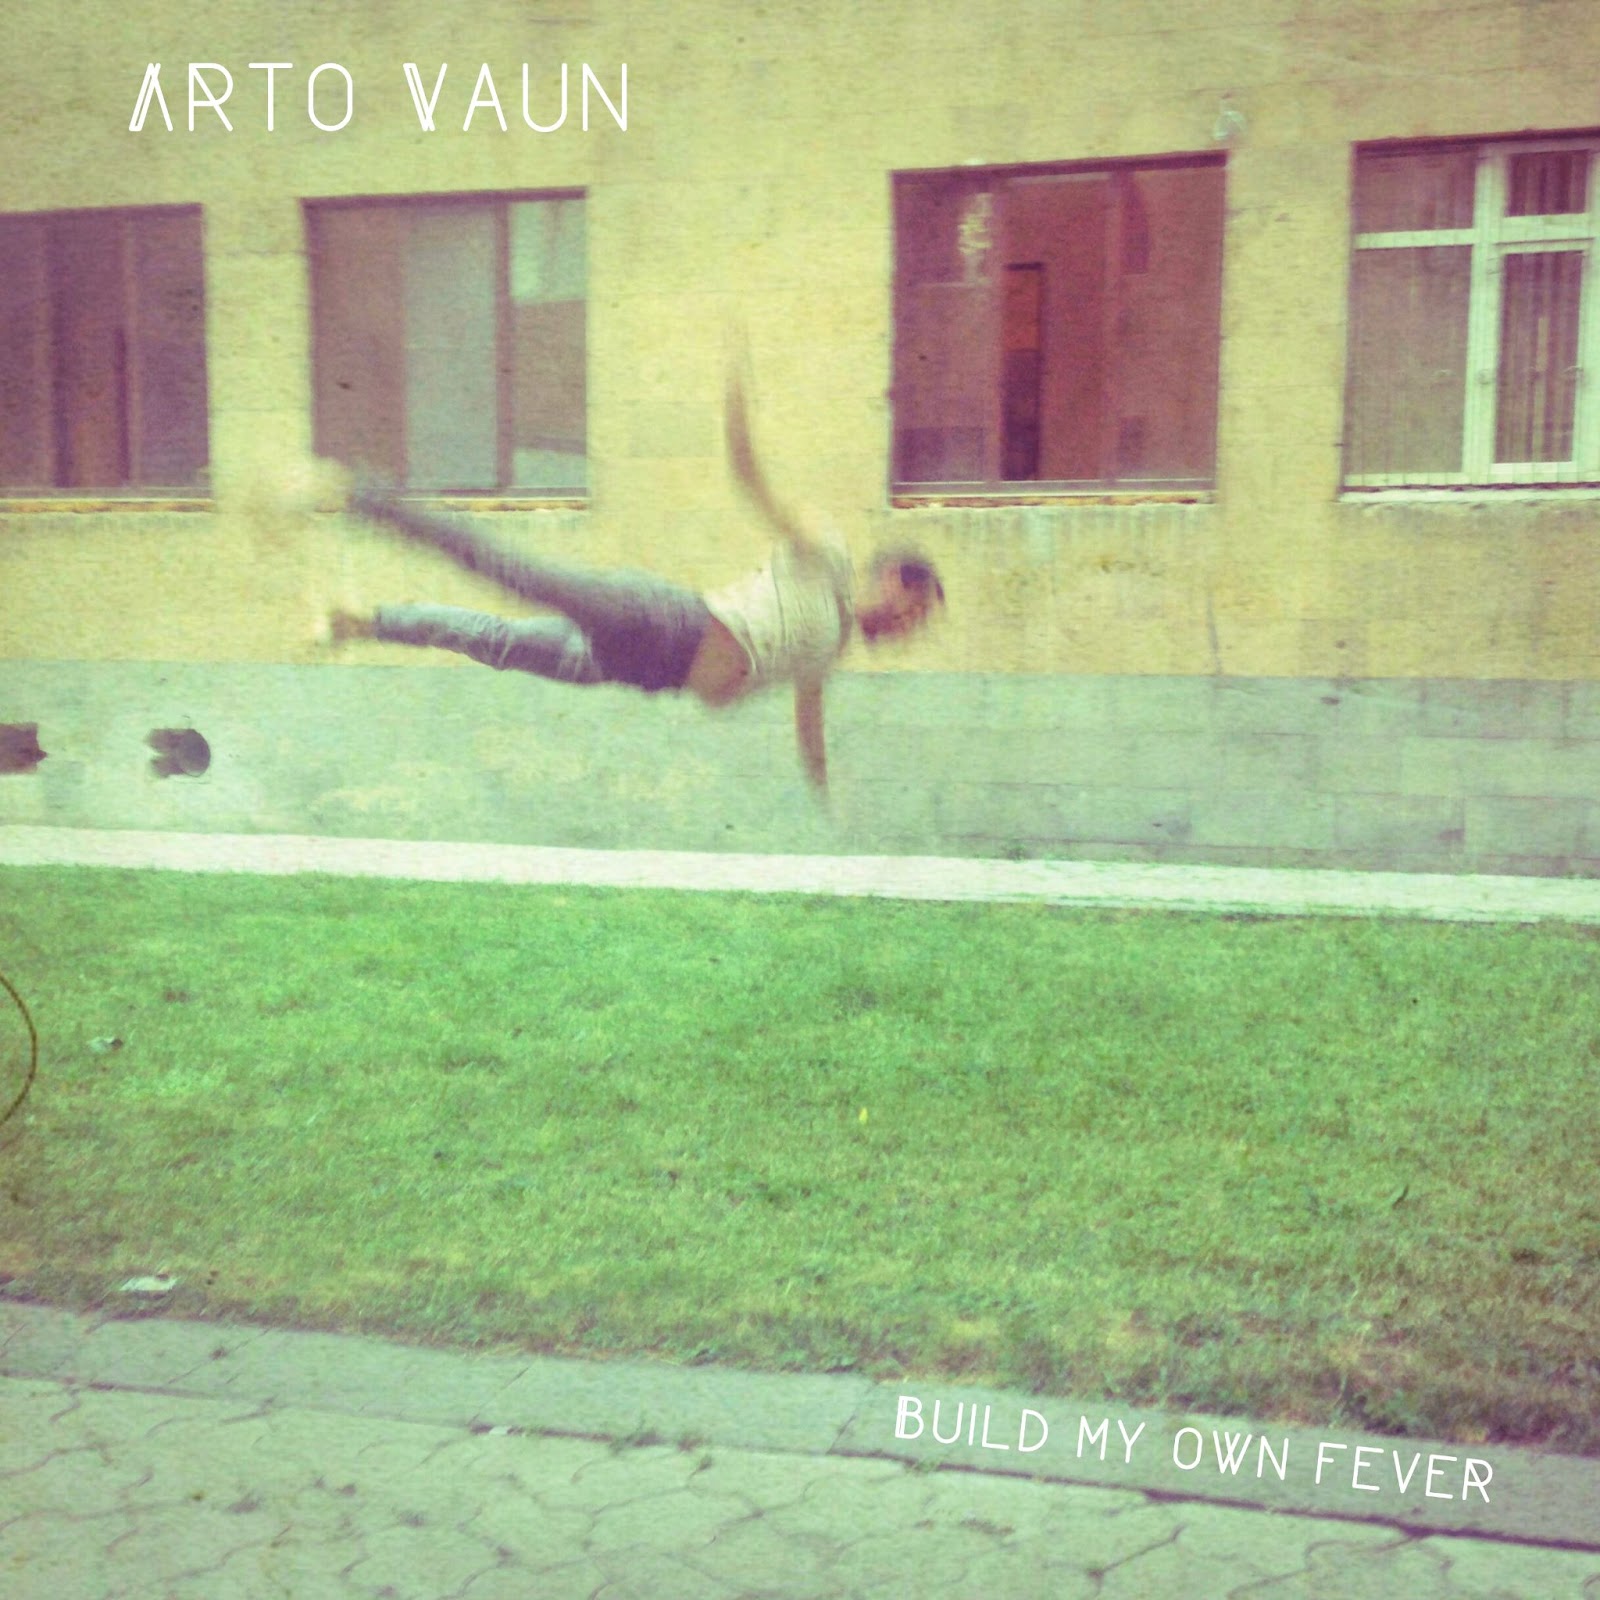 Arto Vaun Releases New Single “Build My Own Fever” from Upcoming Album